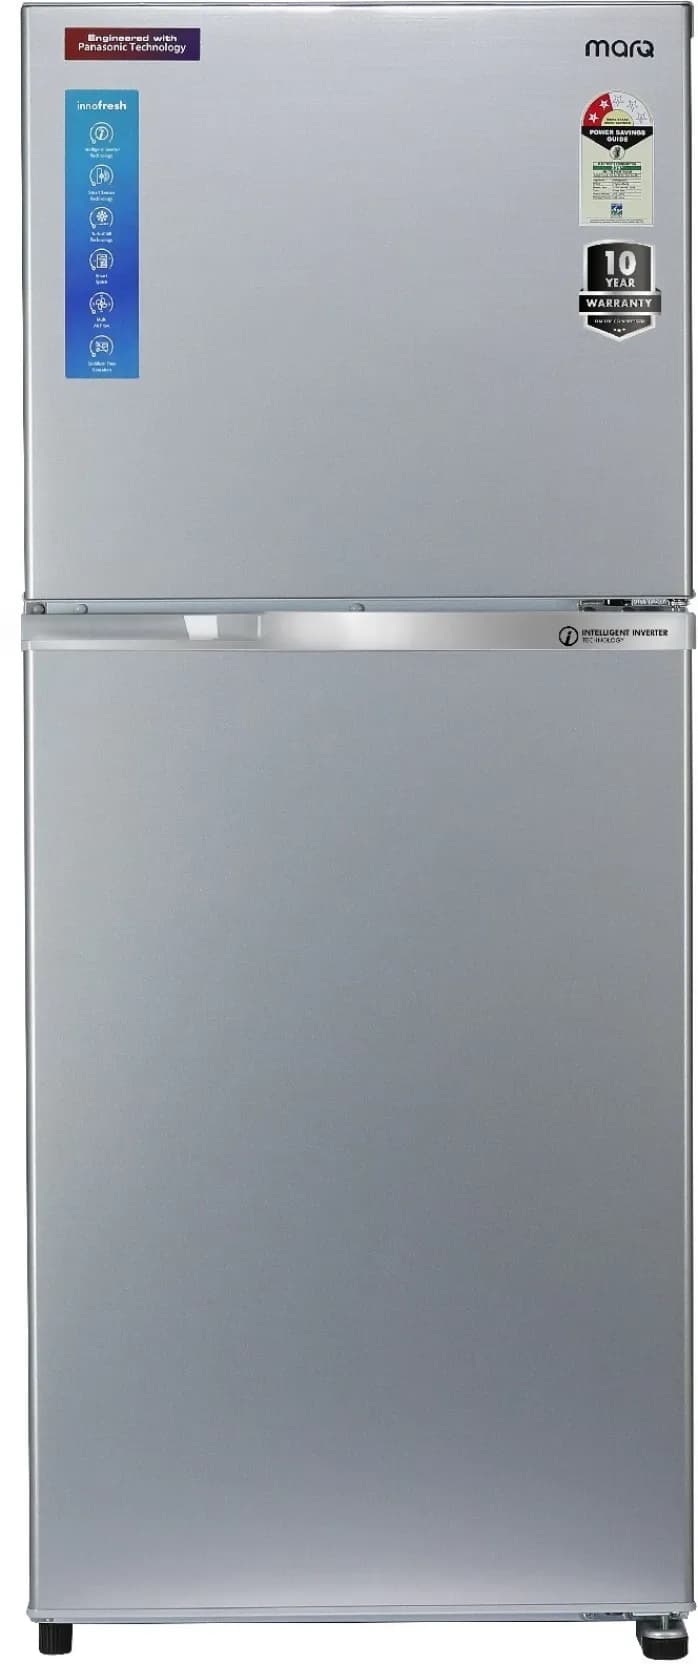 MarQ 340JF2MQDS 338 Ltr Double Door Refrigerator